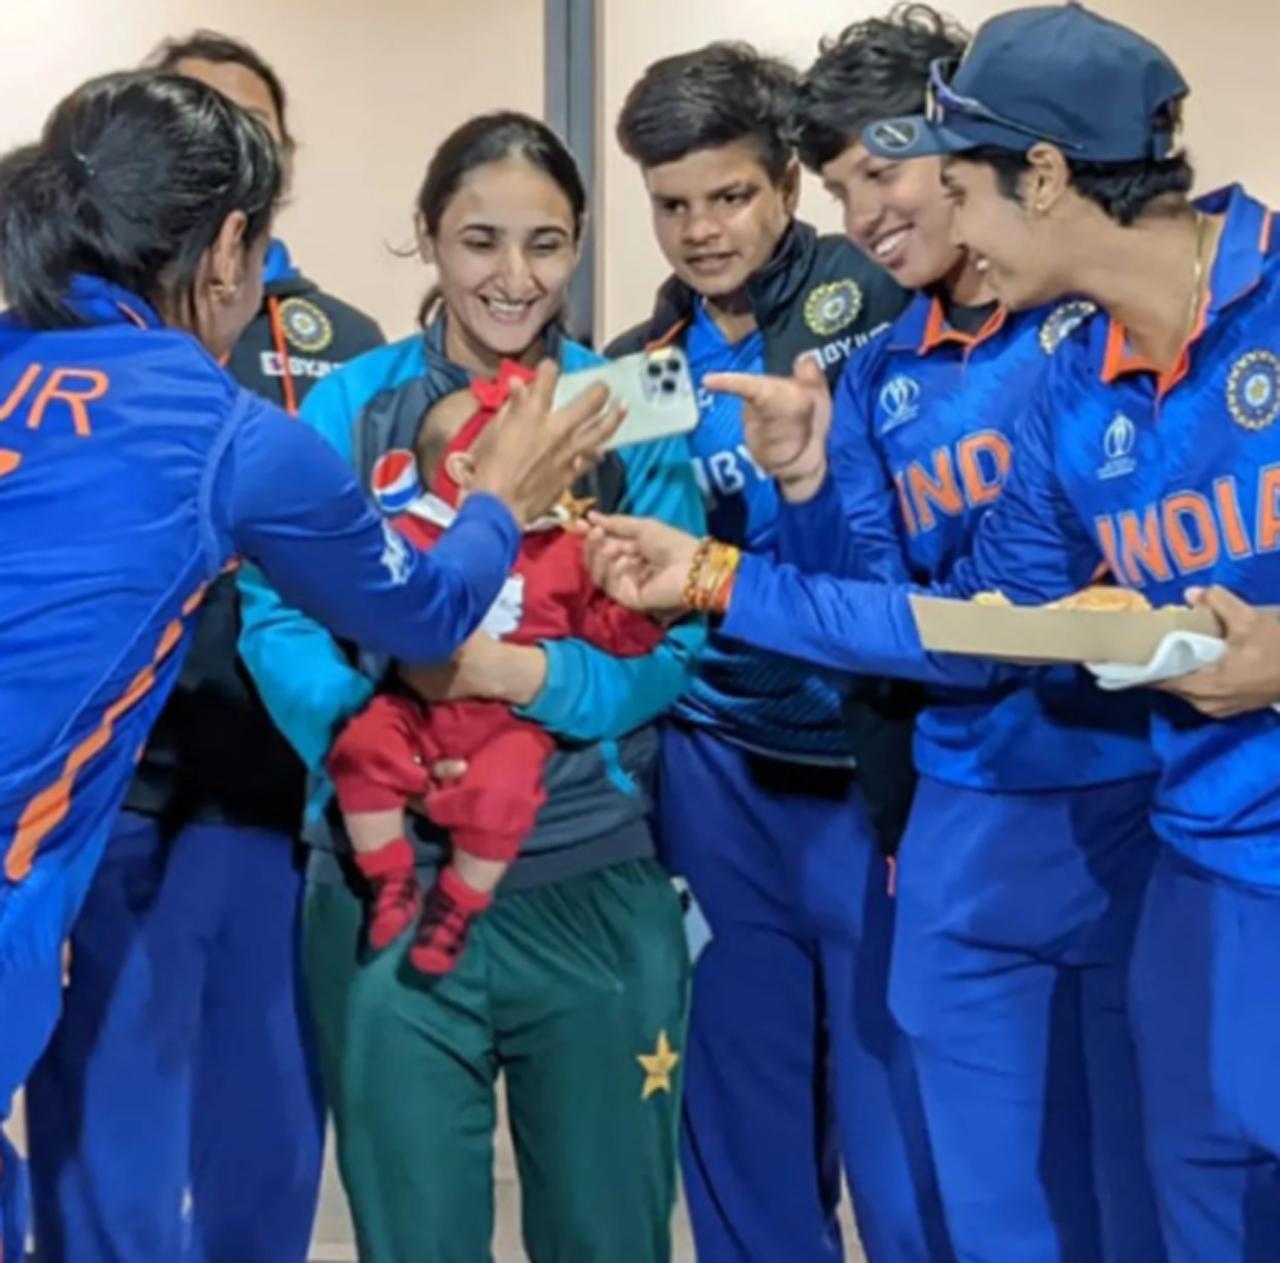 The Indian women's cricket team along with Pakistan women's cricket captain Bismah Maroof and her baby. The Indian women's team defeated the Pakistan women's team in their ICC Women's World Cup opener by a huge margin of 107 runs thanks to Smriti Mandhana and Deepti Sharma's vital partnership and Rajeshwari Gayakwad's four-wicket haul. Post the match, both team's displayed the true spirit of cricket with the Indian women's team giving Maroof and her newborn baby a warm welcome. Picture Courtesy/ ICC's official Instagram